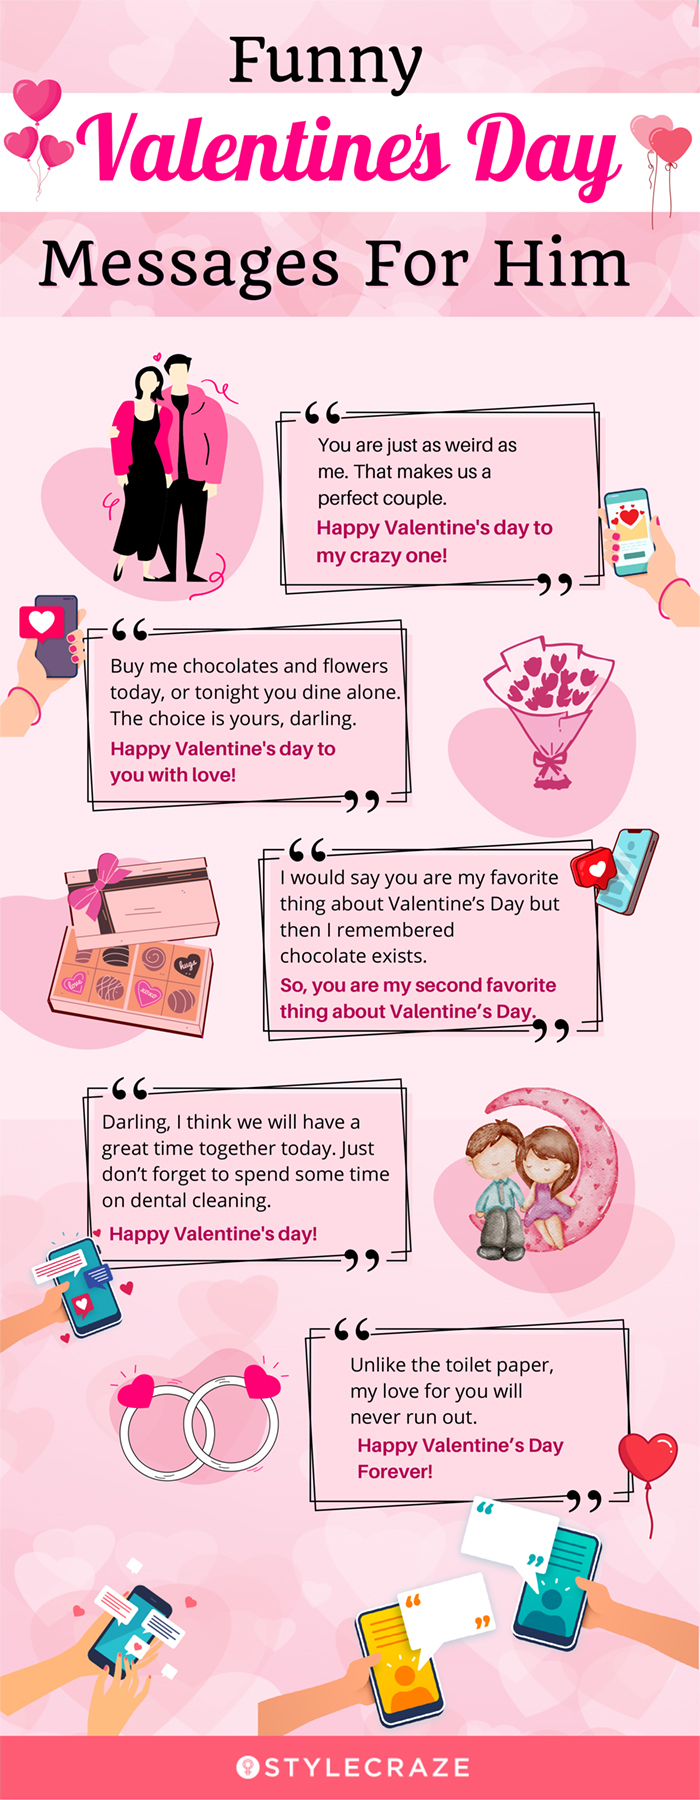 Funny valentines day messages for him